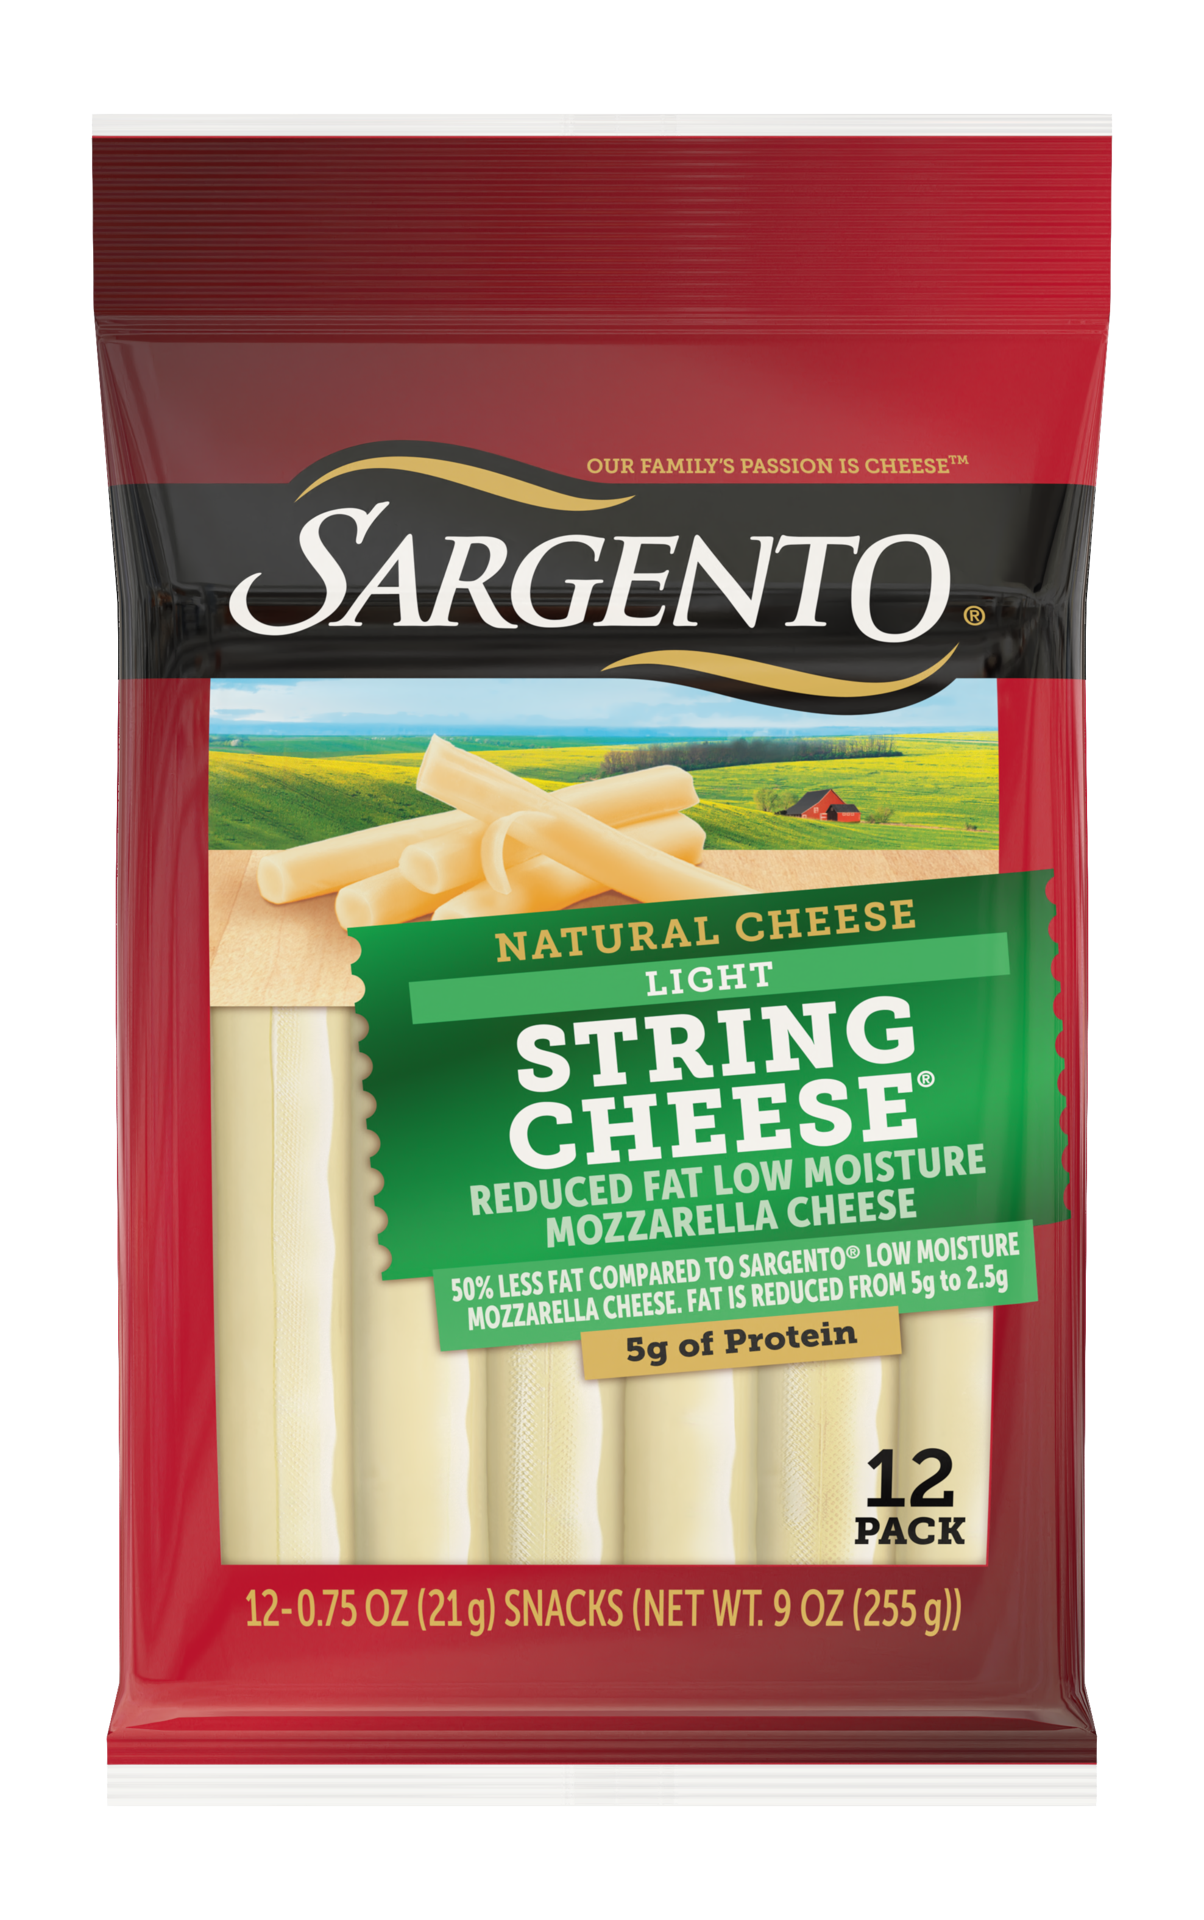 slide 1 of 62, Sargento Reduced Fat Low Moisture Part-Skim Mozzarella Natural Cheese Light String Cheese Snacks, 9 oz., 12-Count, 9 oz